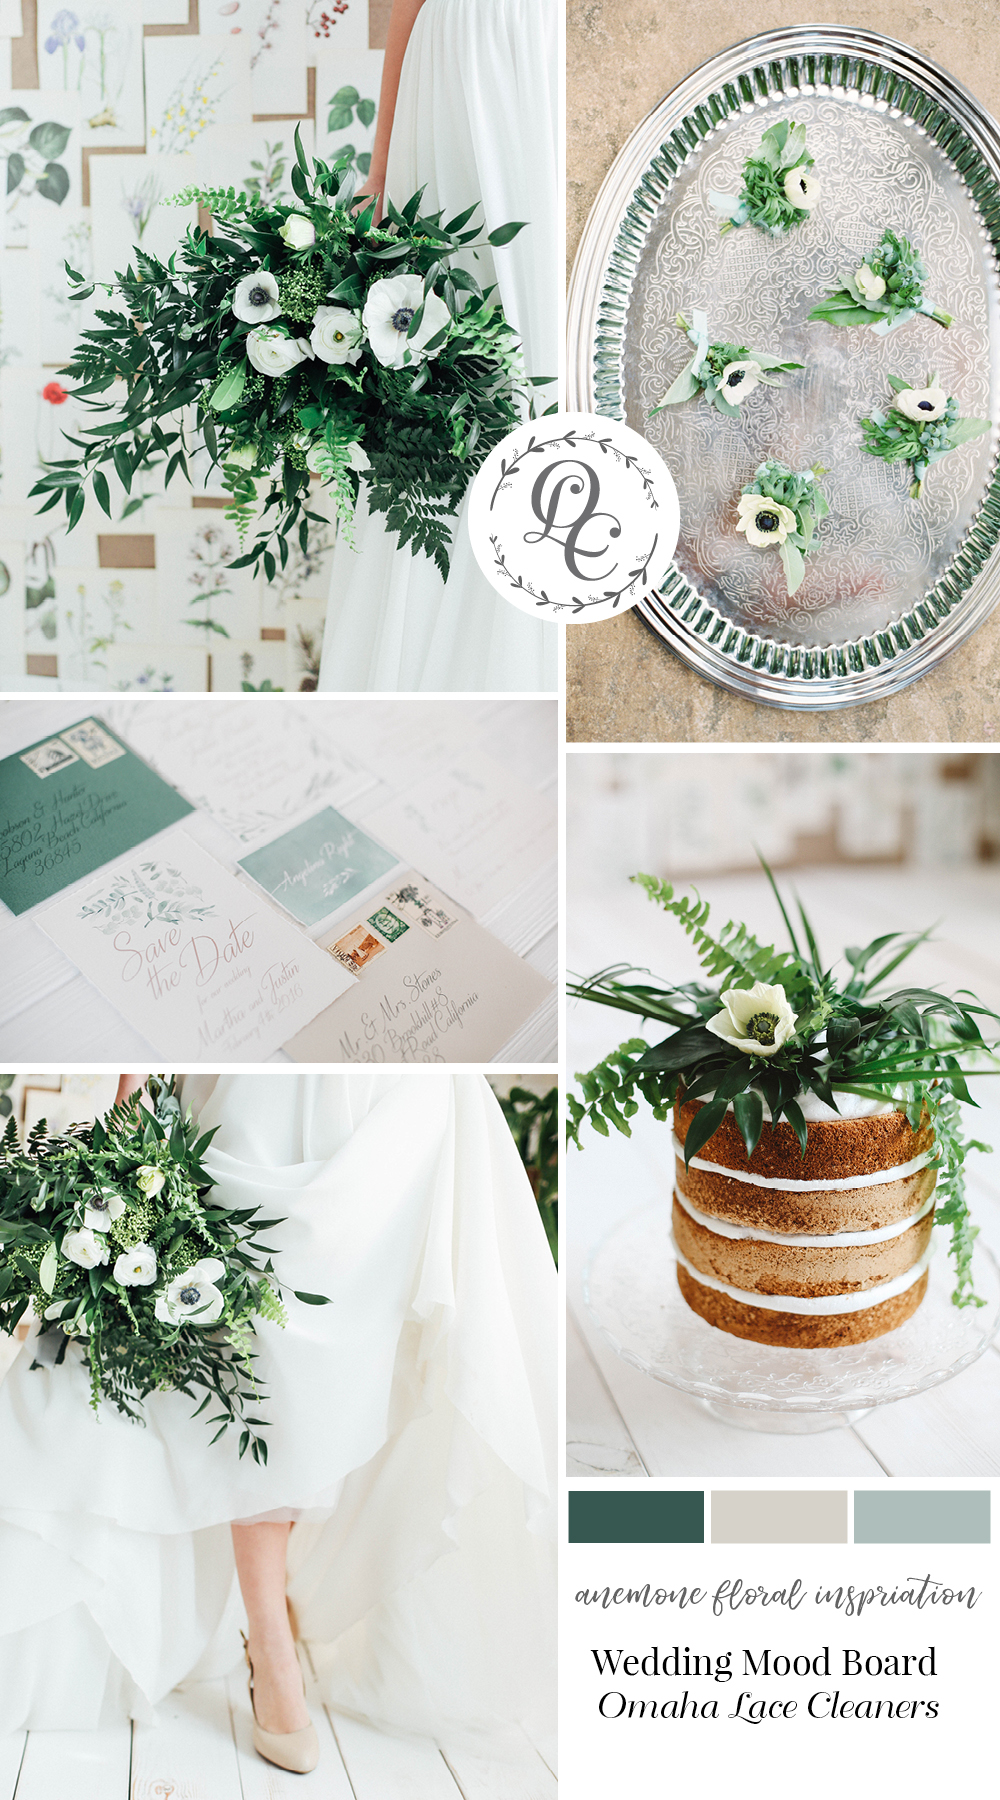 Pretty Wedding Floral Inspiration with Anemones